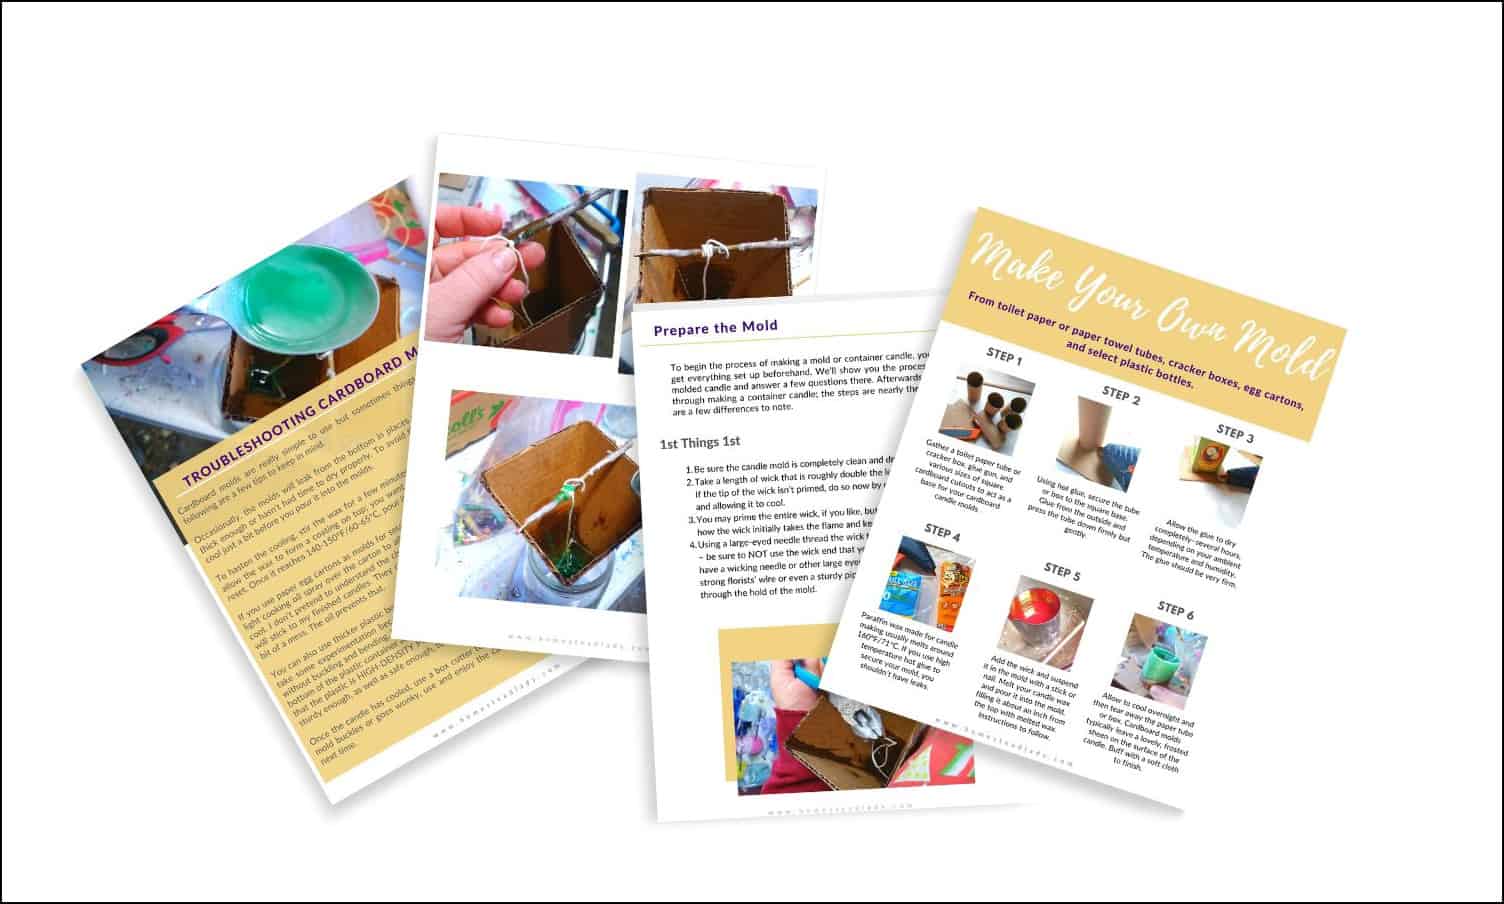 Candle Making in a Day Ebook Interior Pages